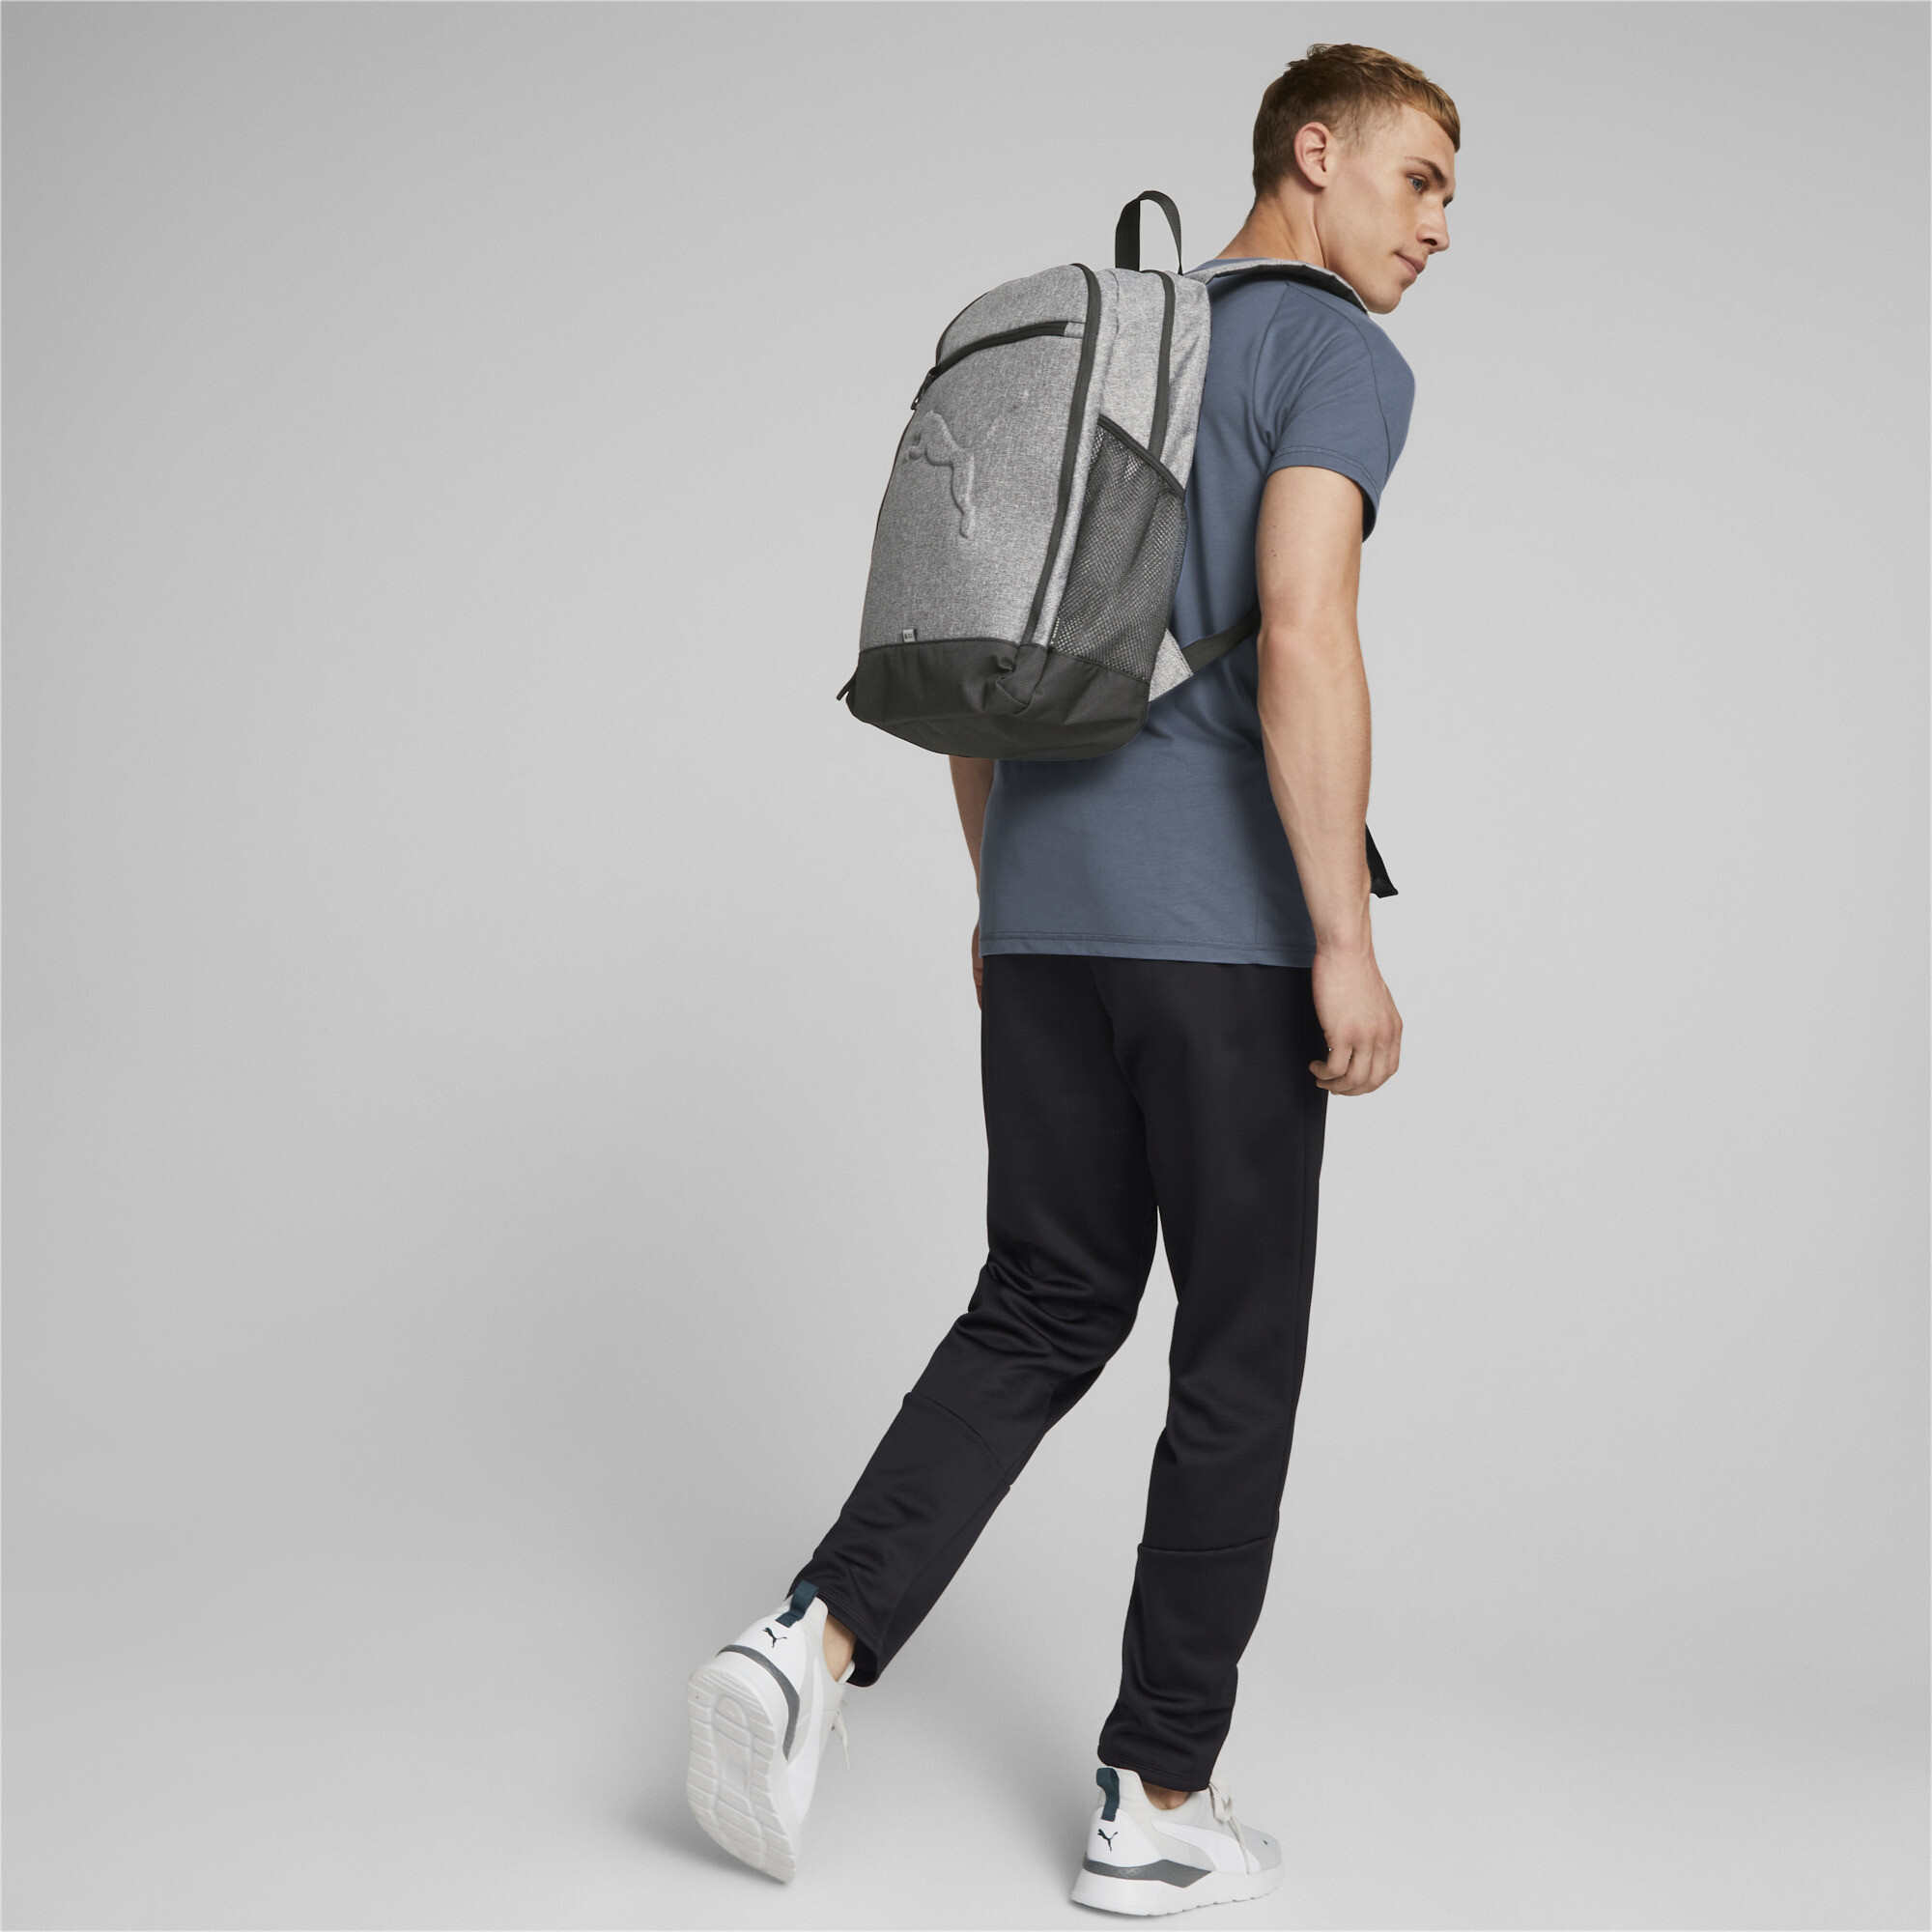 Puma Buzz Backpack, Gray, Accessories